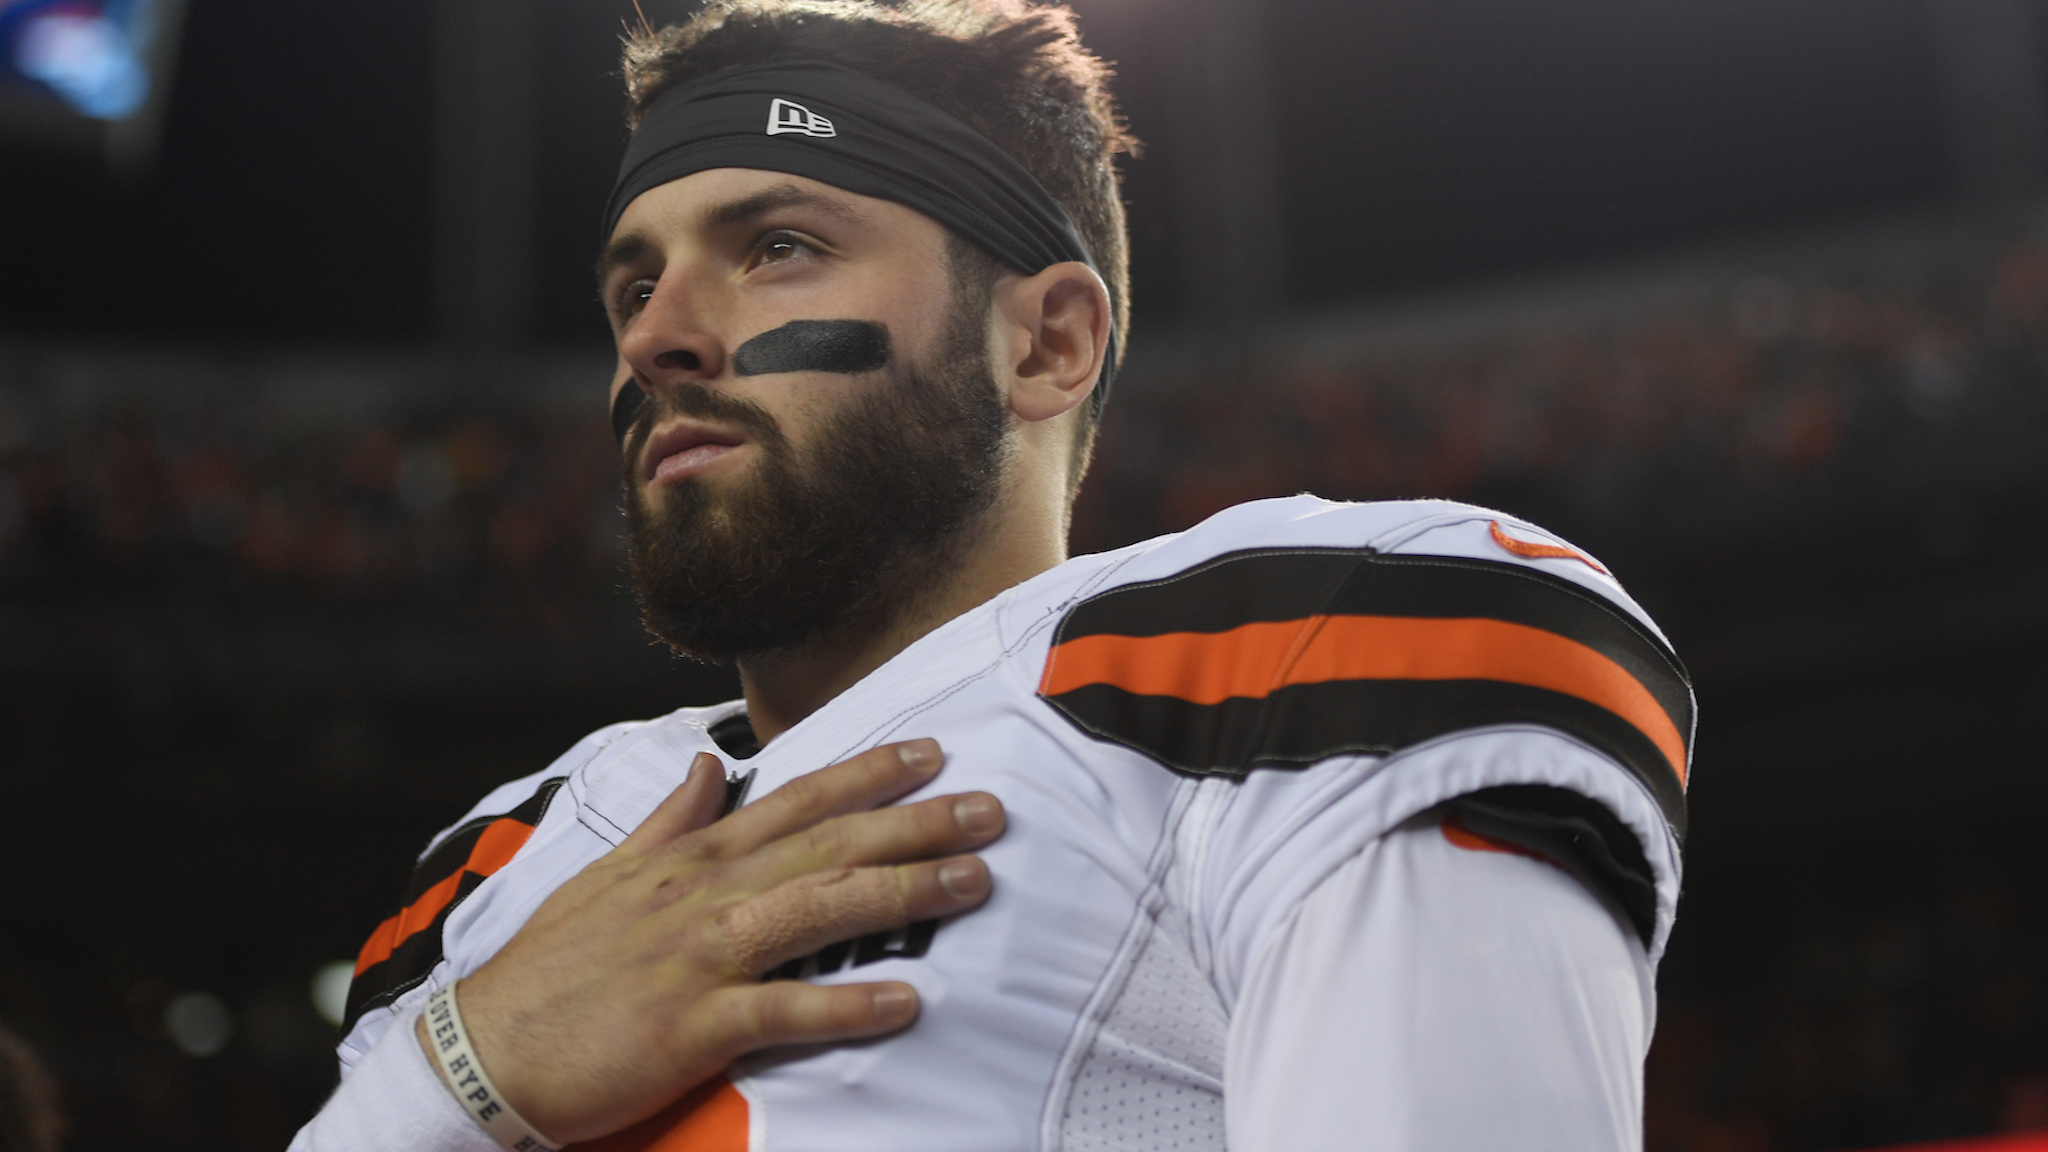 Baker Mayfield (6) of the Cleveland Browns during the National Anthem before the game against the Denver Broncos. The Denver Broncos hosted the Cleveland Browns at Broncos Stadium at Mile High in Denver, Colorado on Saturday, December 15, 2018.